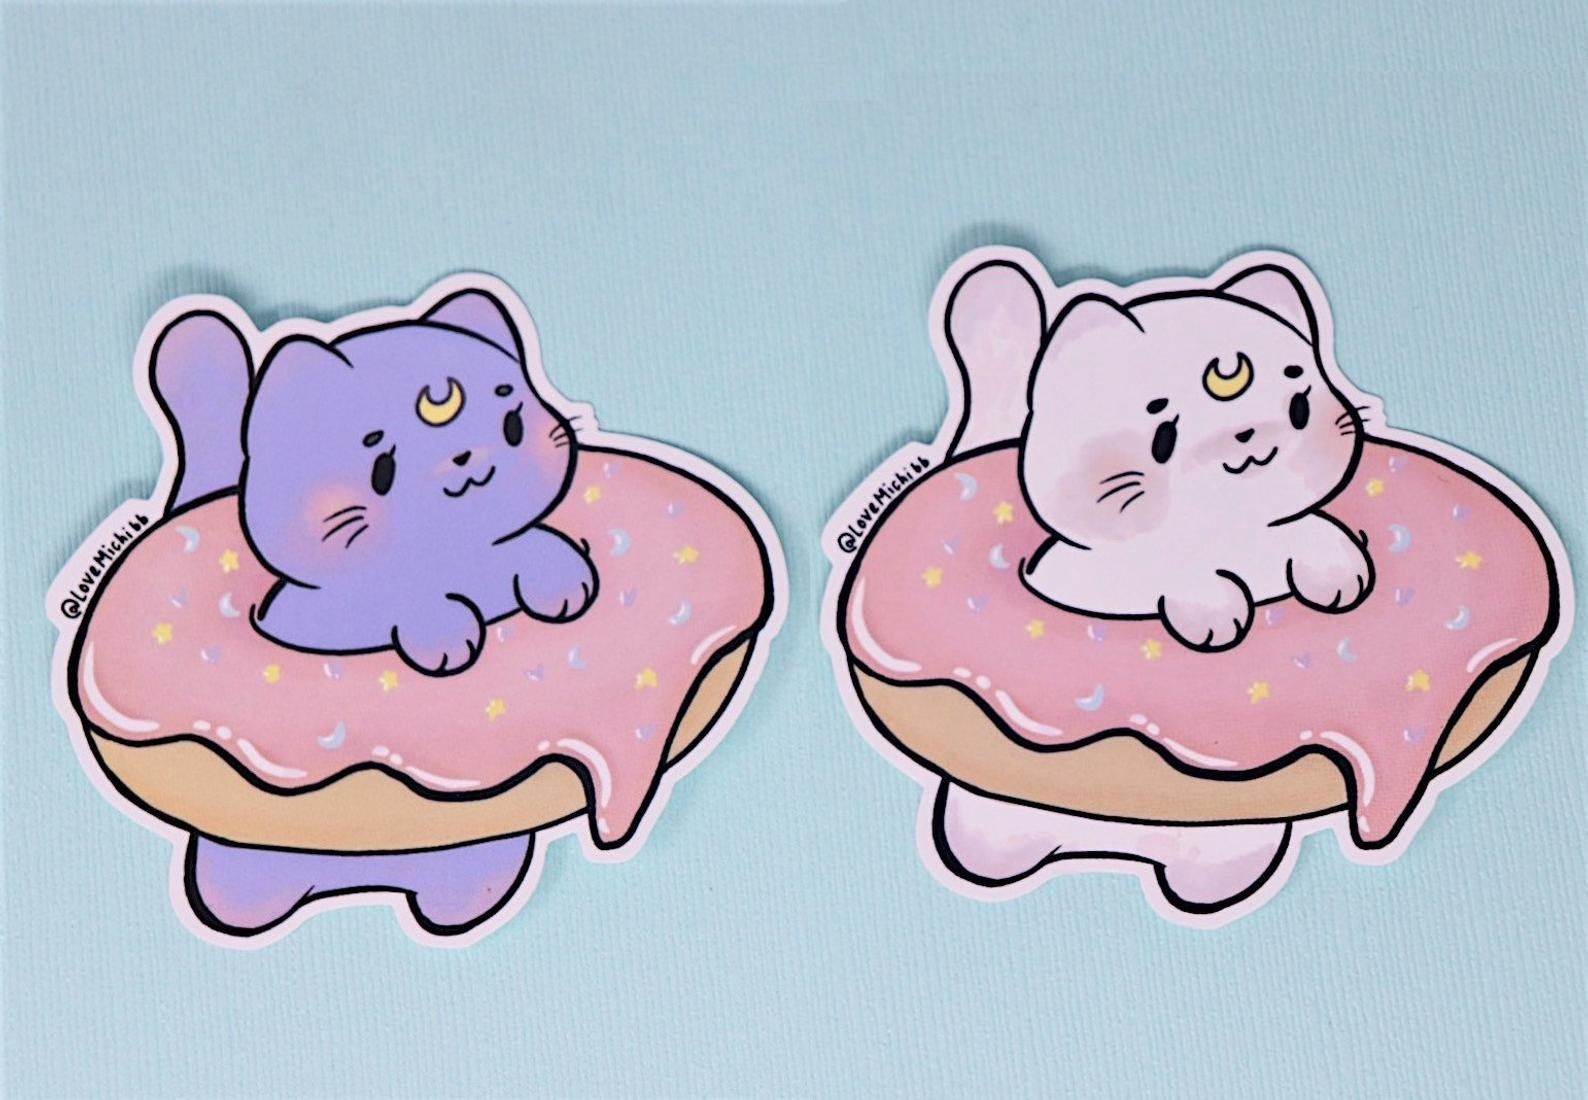 Two of the stickers, one pink cat and one purple cat, sitting in two donuts with pink frosting with sprinkles against a blue background